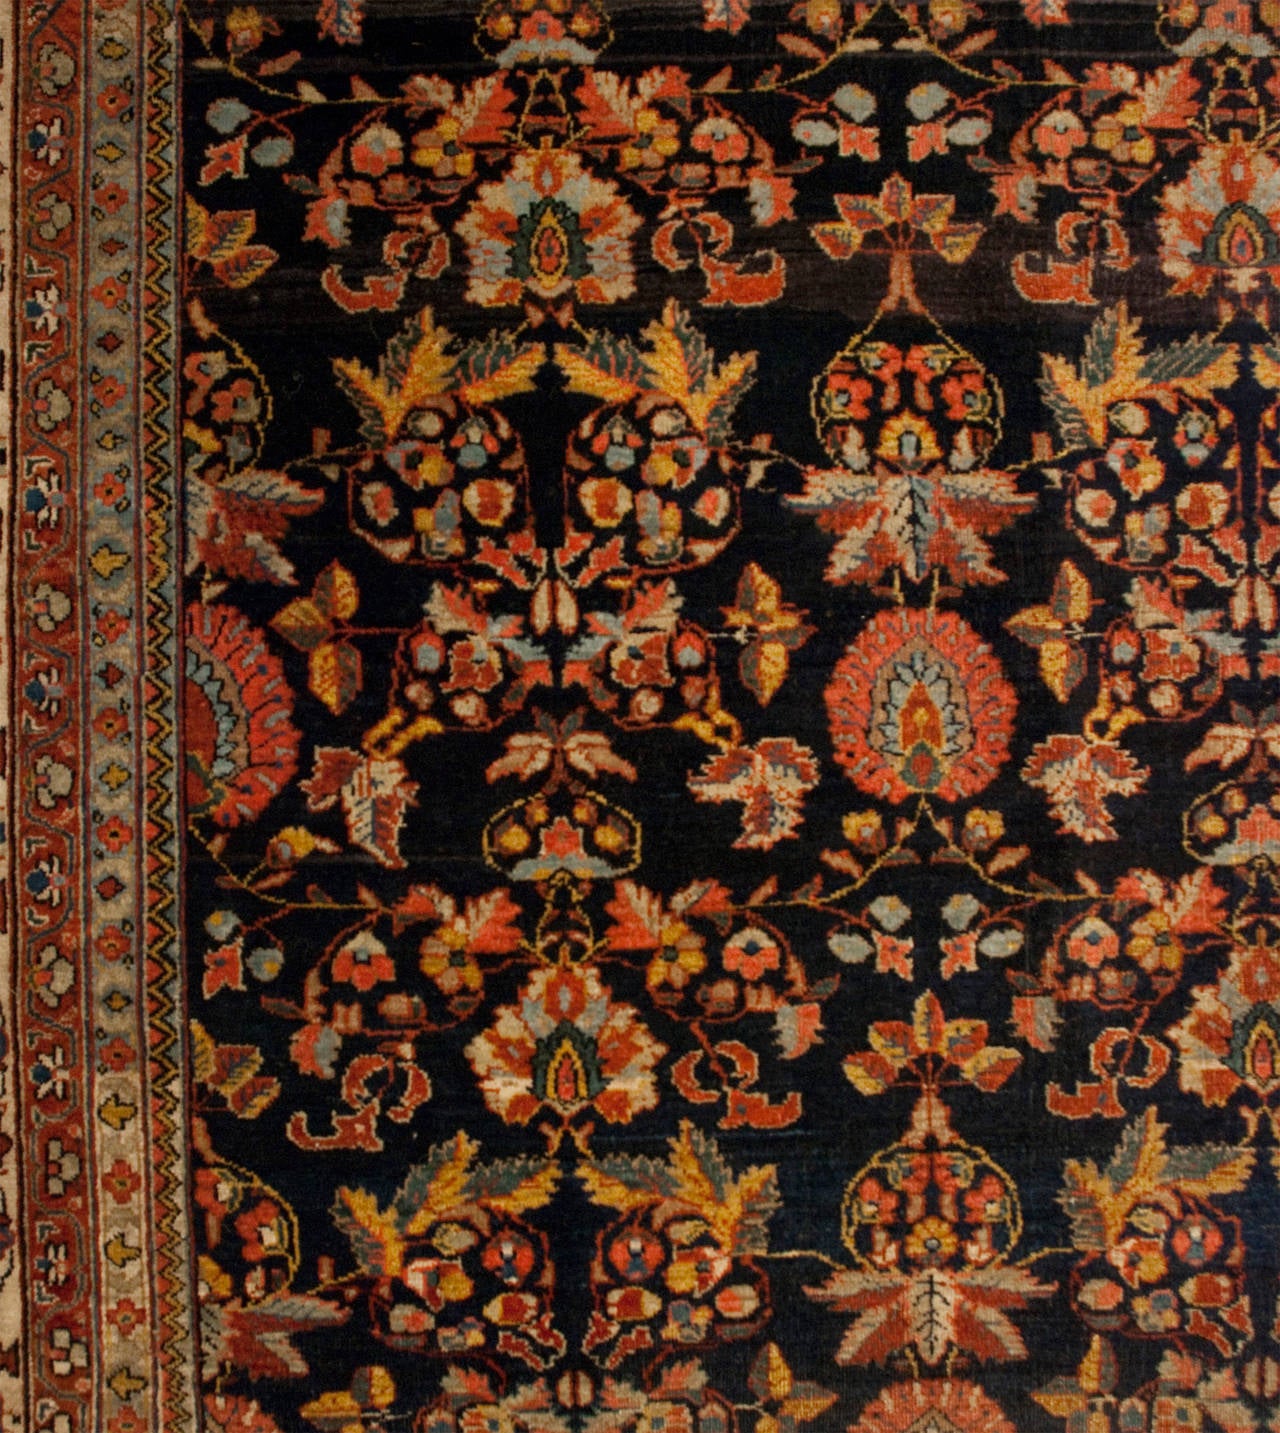 A late 19th century Persian Kashan rug with a wonderful multicolored tree-of-life pattern on a rich indigo background, surrounded by a contrasting floral border.